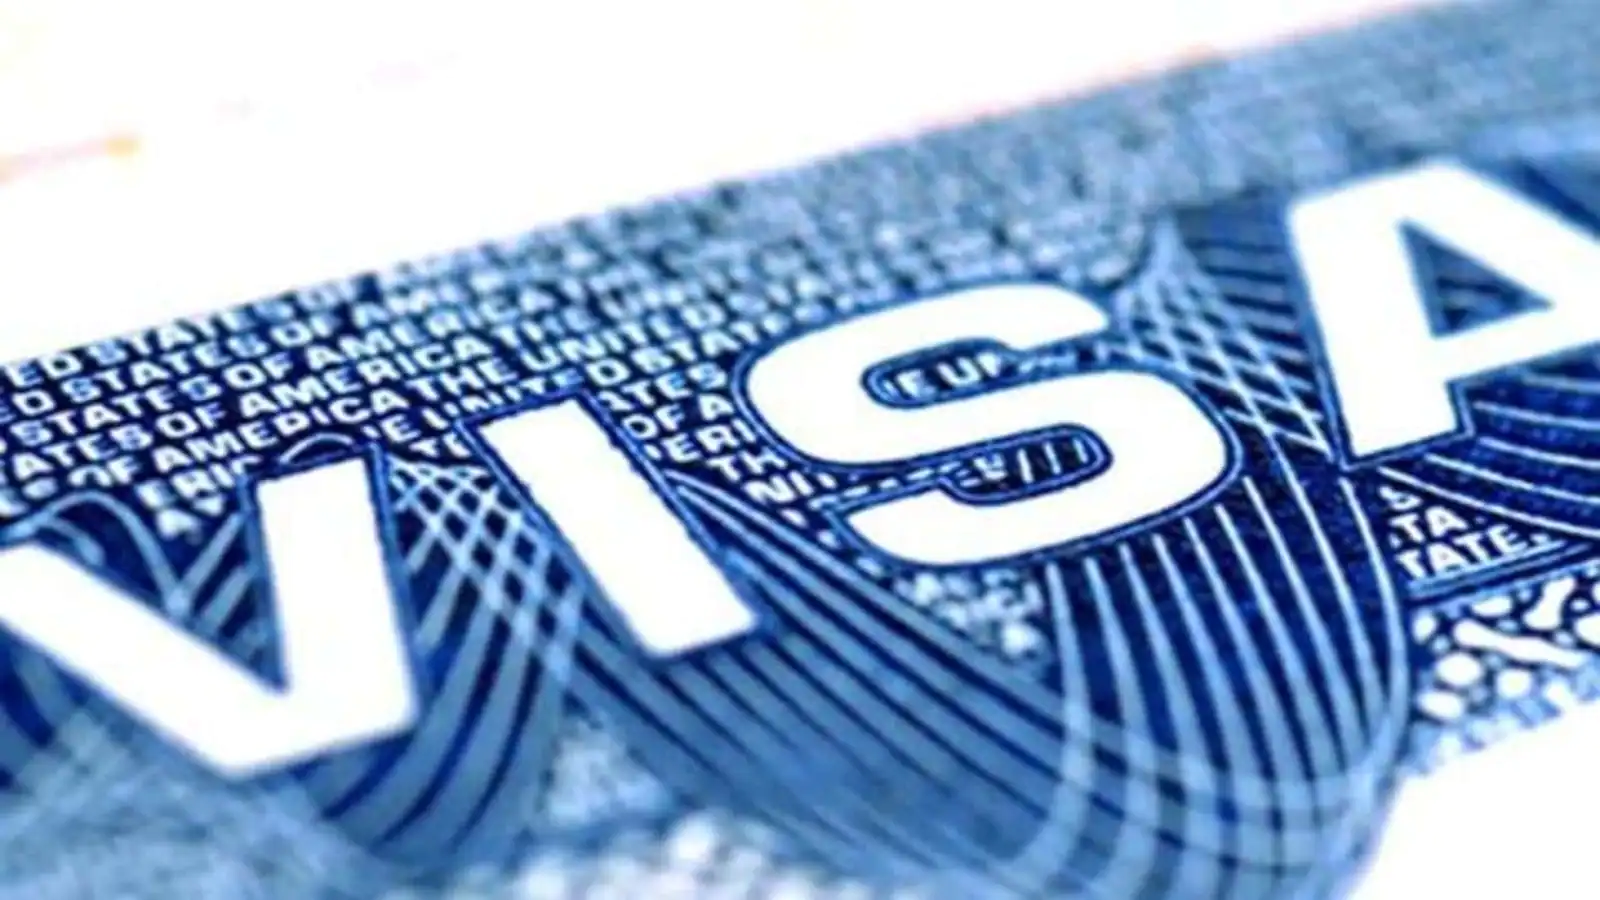 US Immigration Law Change Benefits Indian Spouses of H-1B Visa Holders